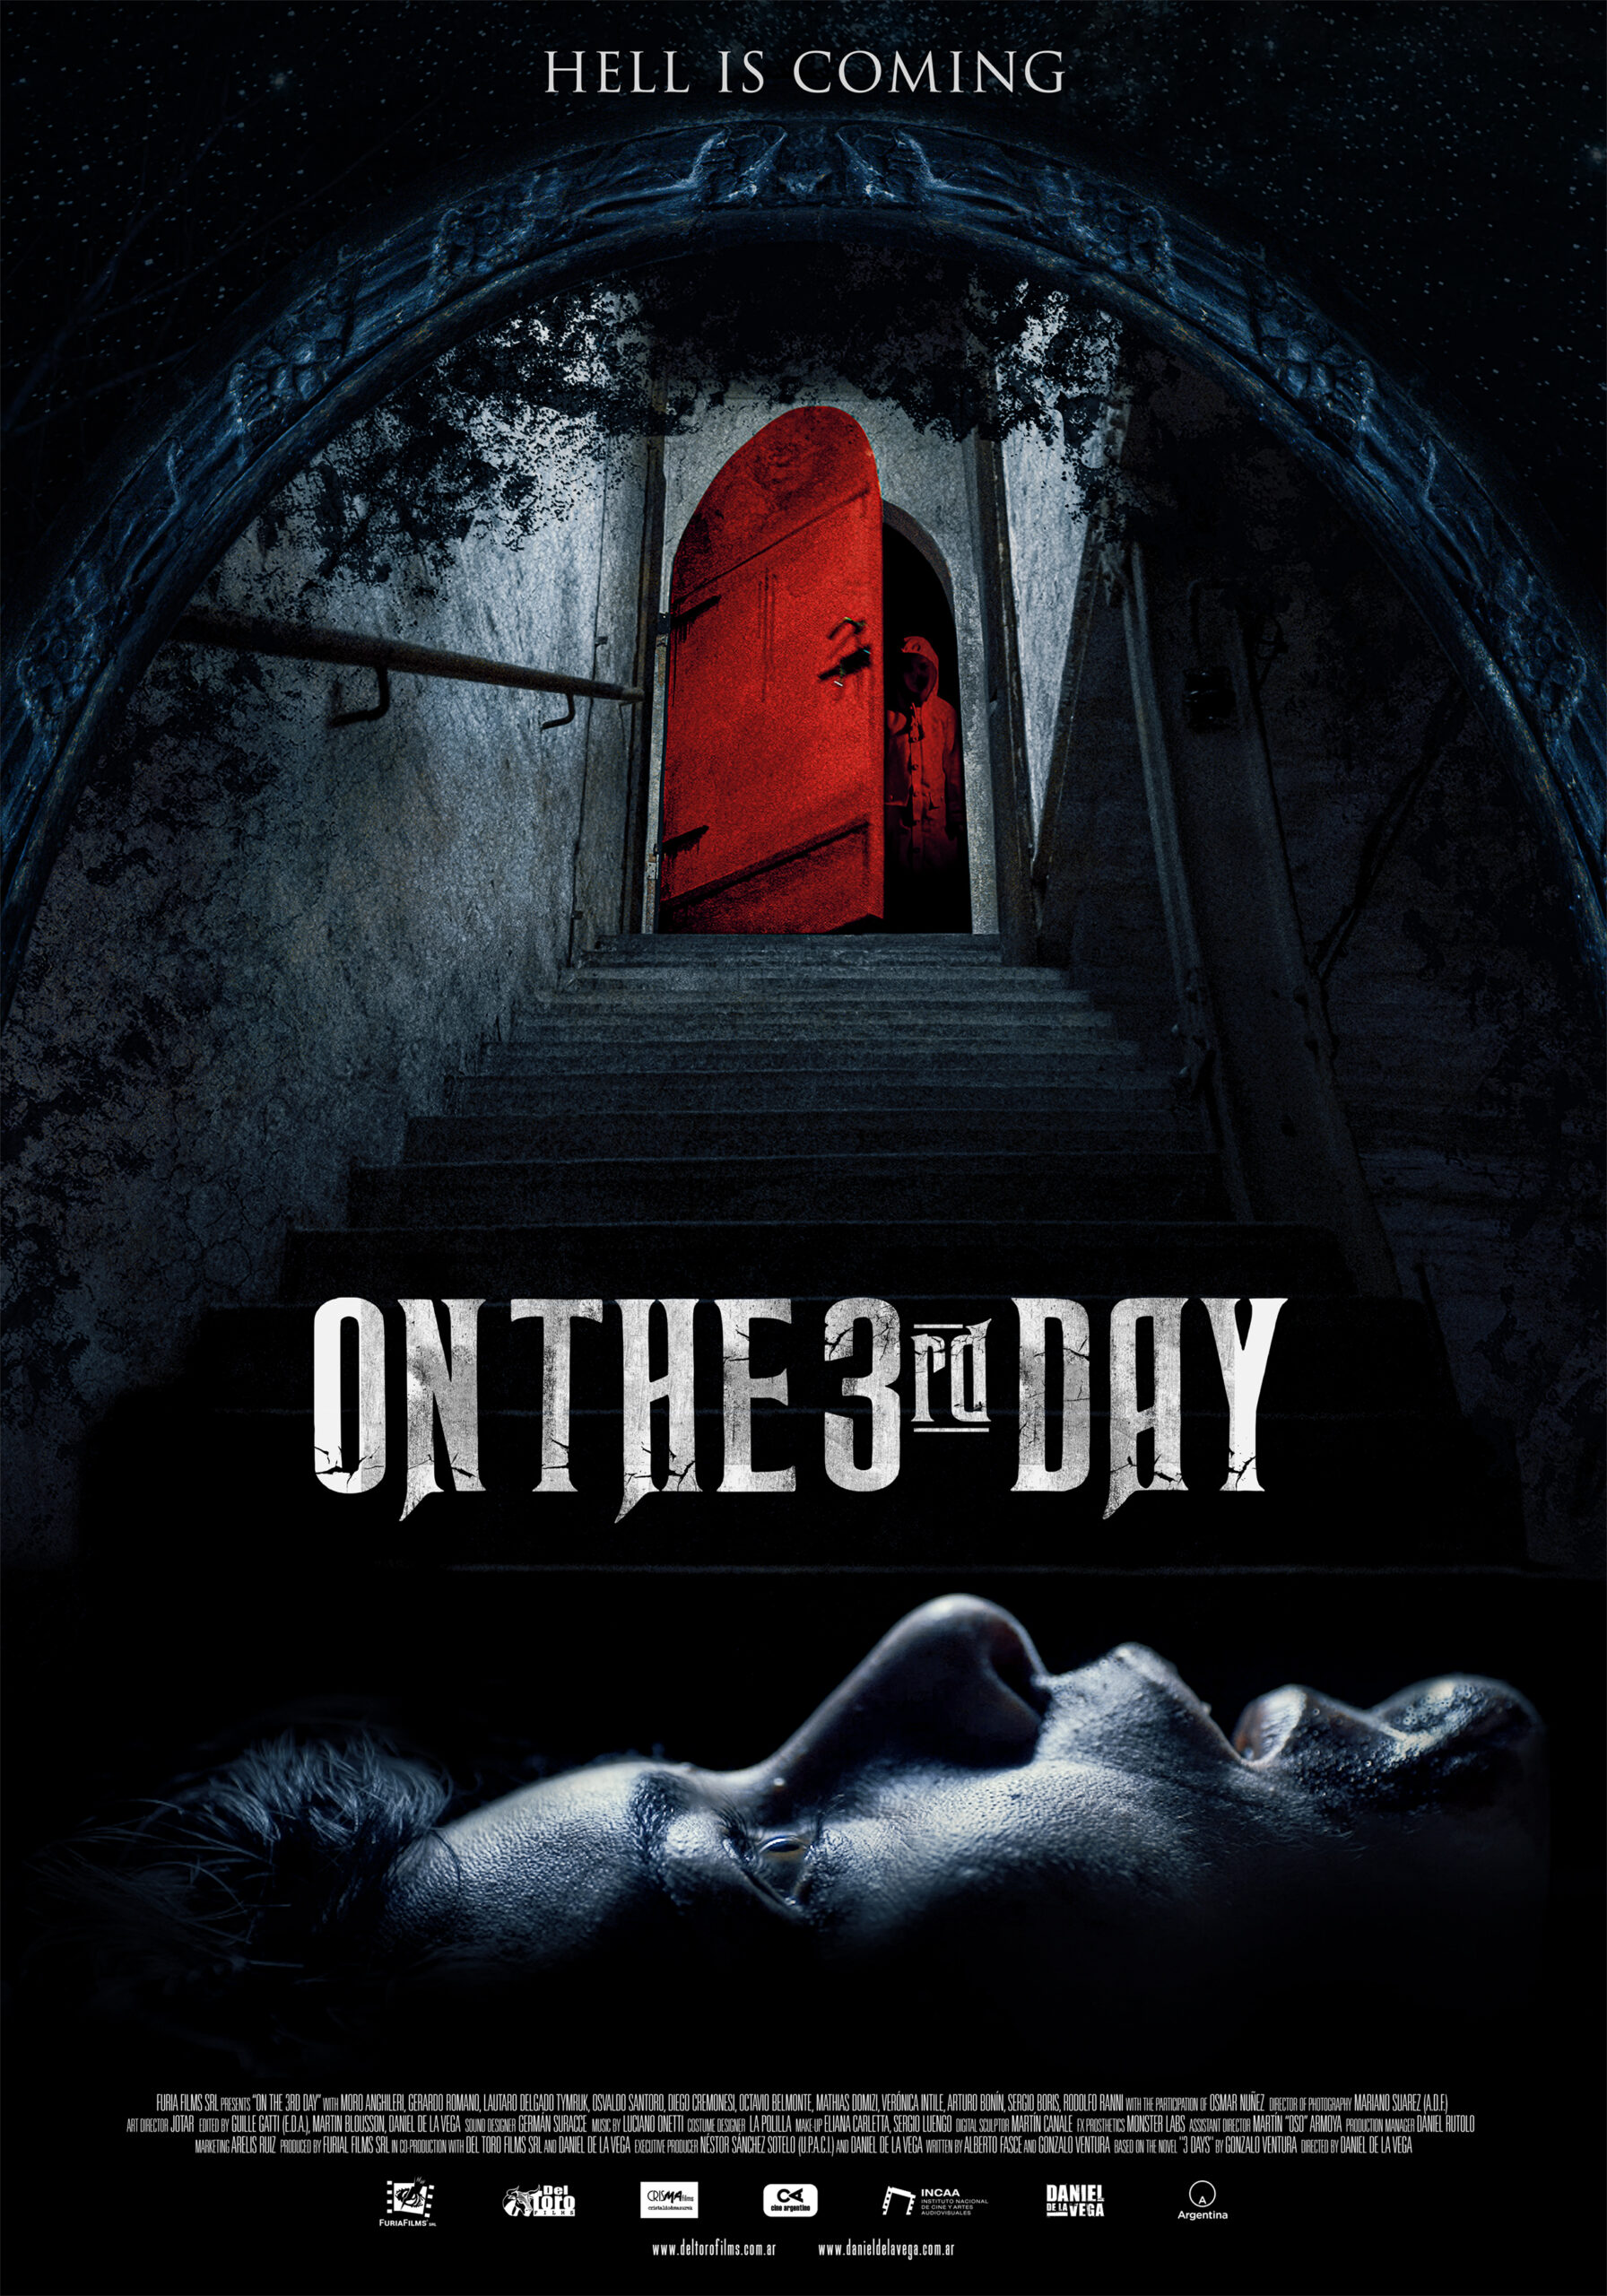 [NEWS] Il trailer inglese dell’horror argentino On the 3rd Day